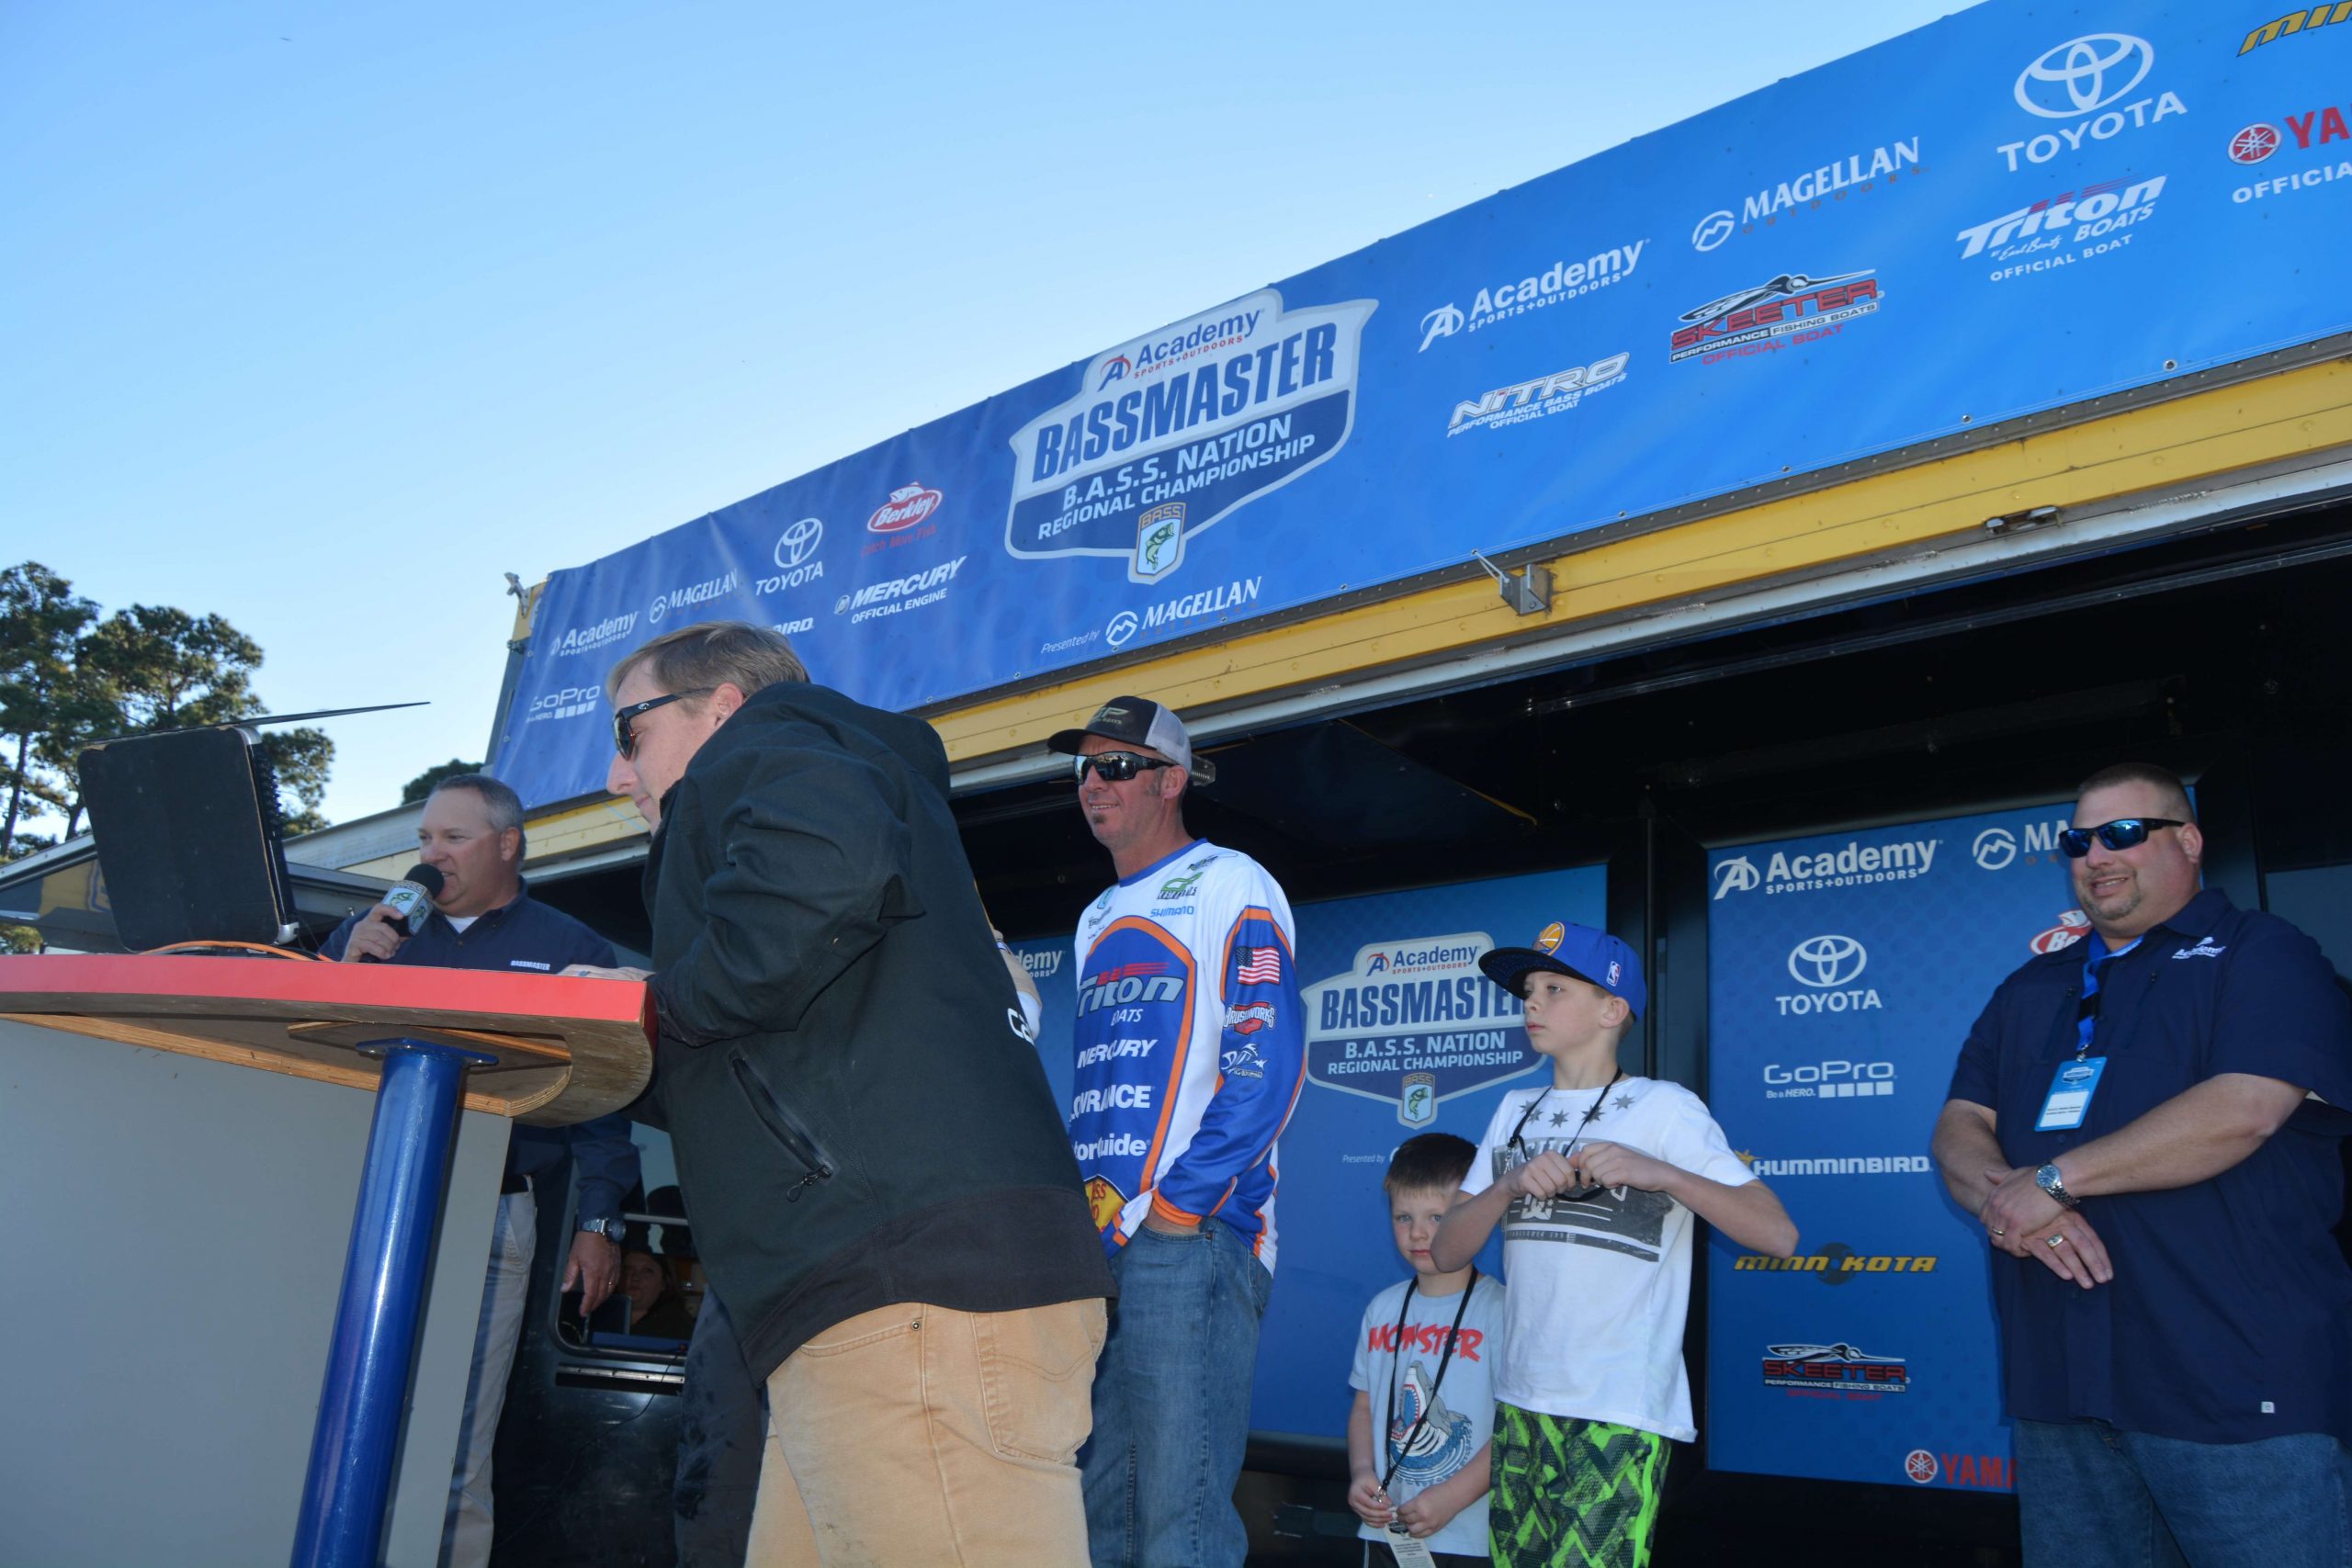 He takes the stage with his closest competitor, Ocamica, and gets his fish weighed.